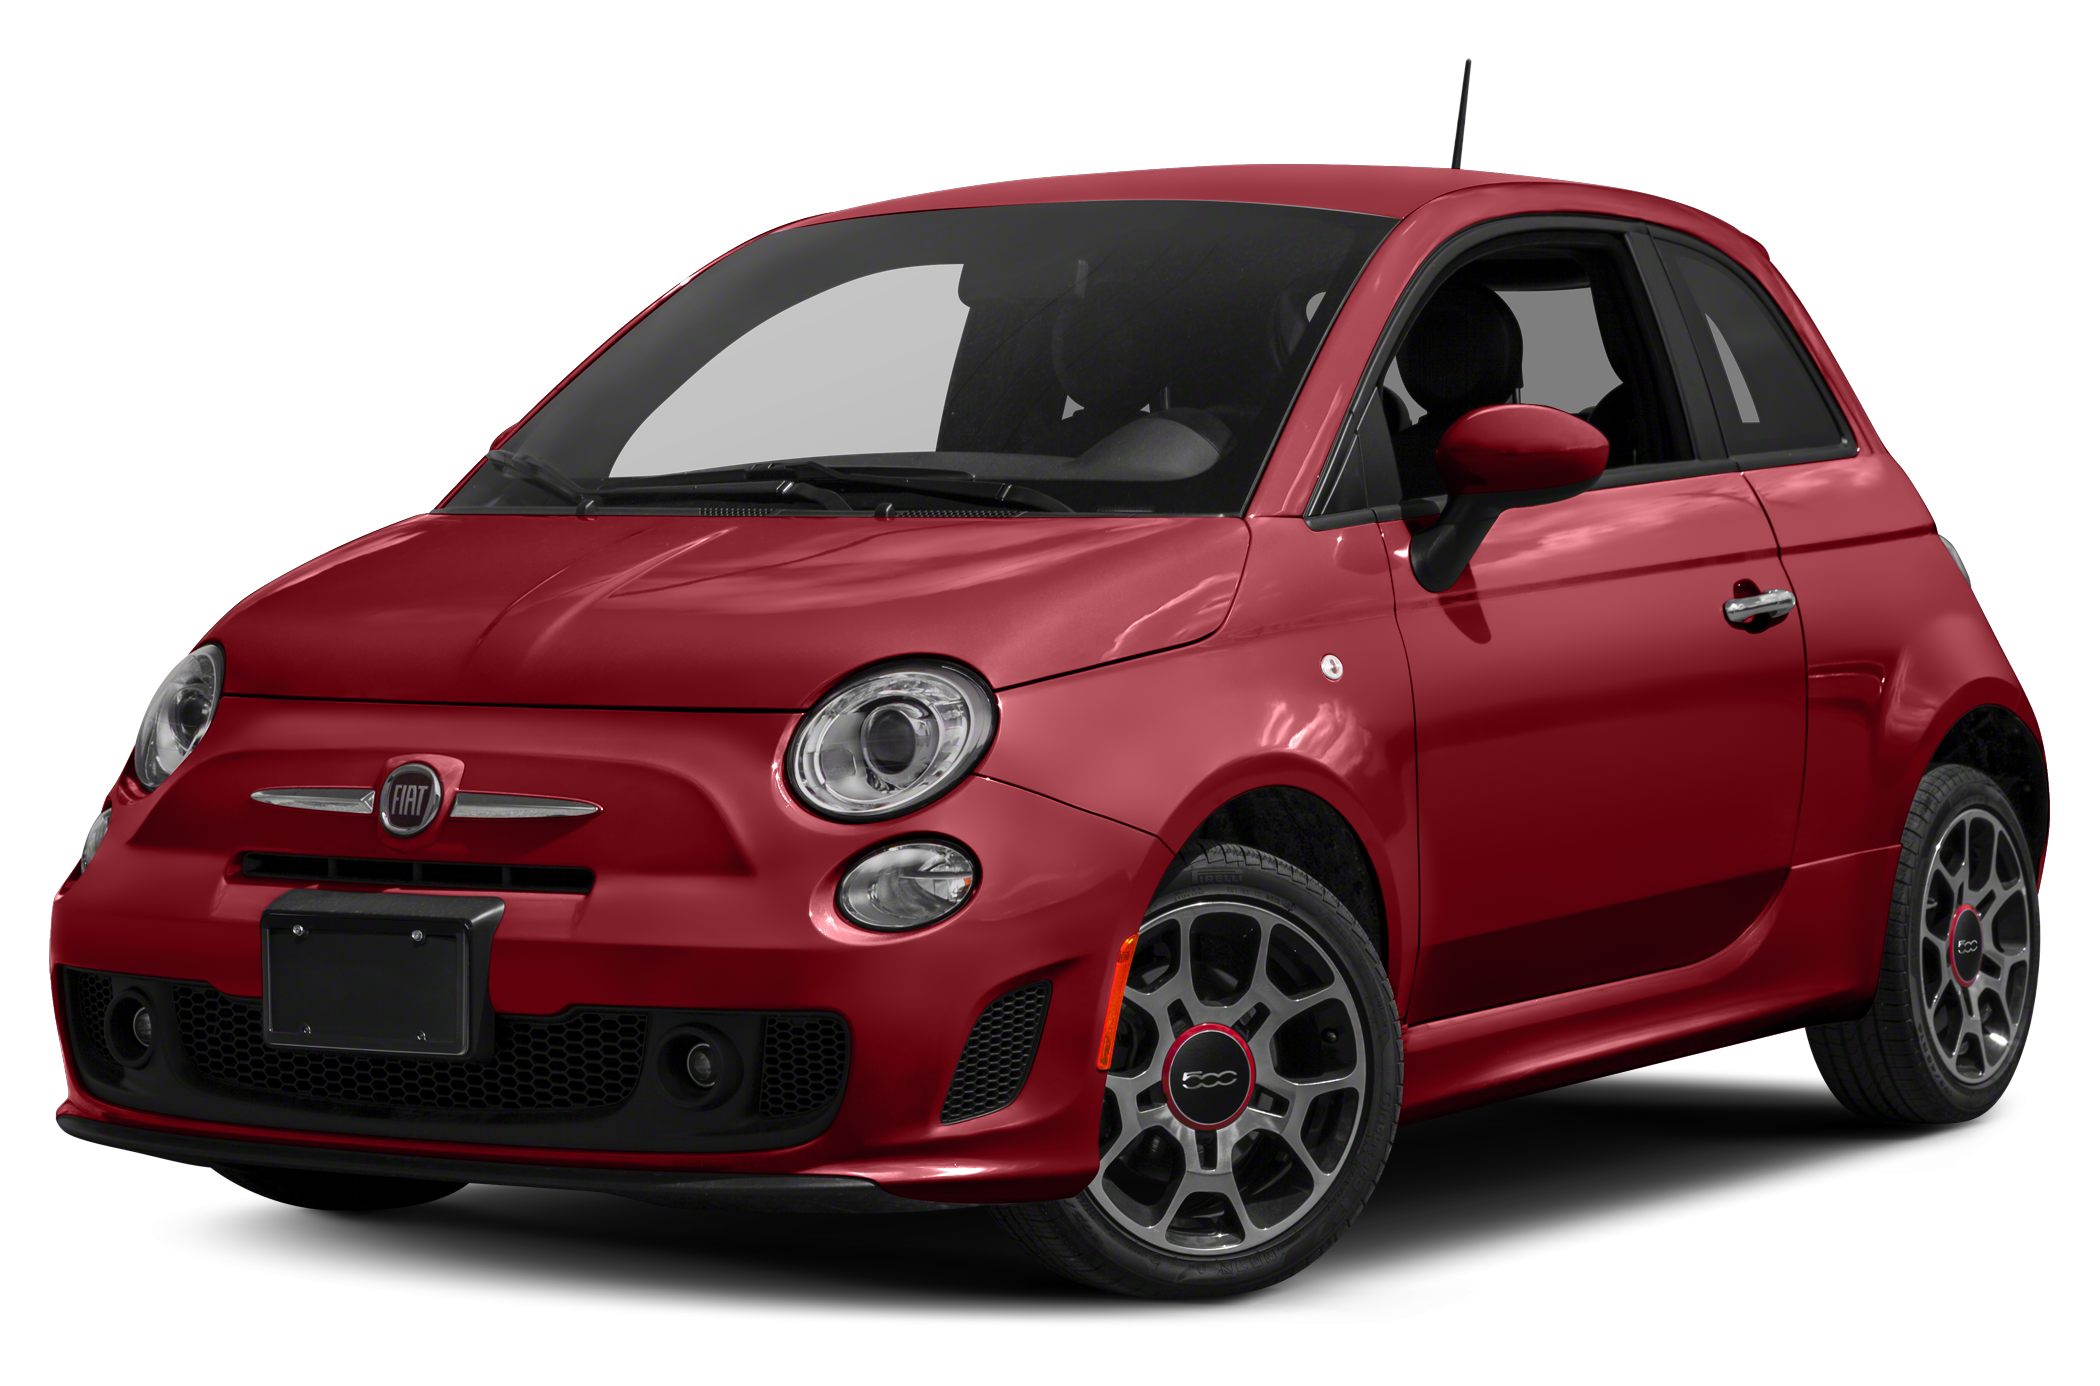 14 Fiat 500 Turbo 2dr Hatchback Specs And Prices